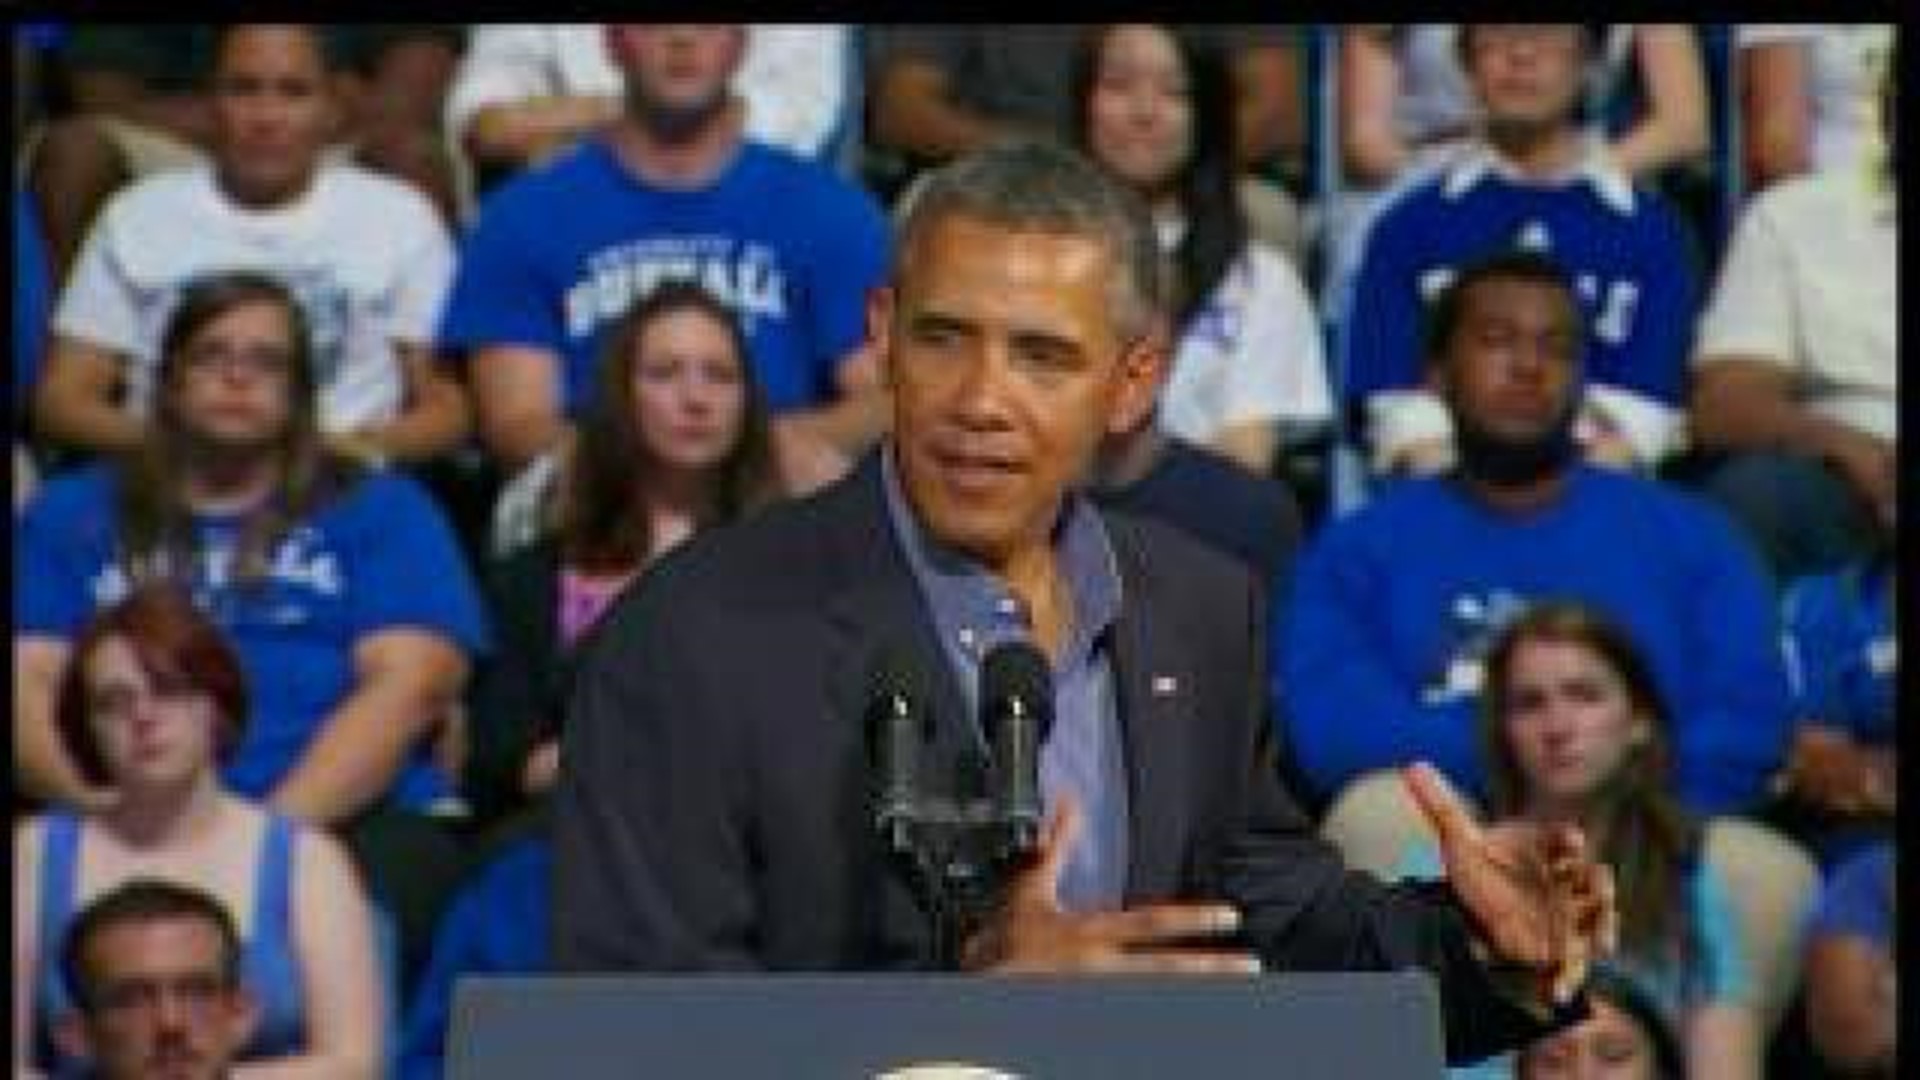 Obama unveils 'pay as you earn' plan for college students